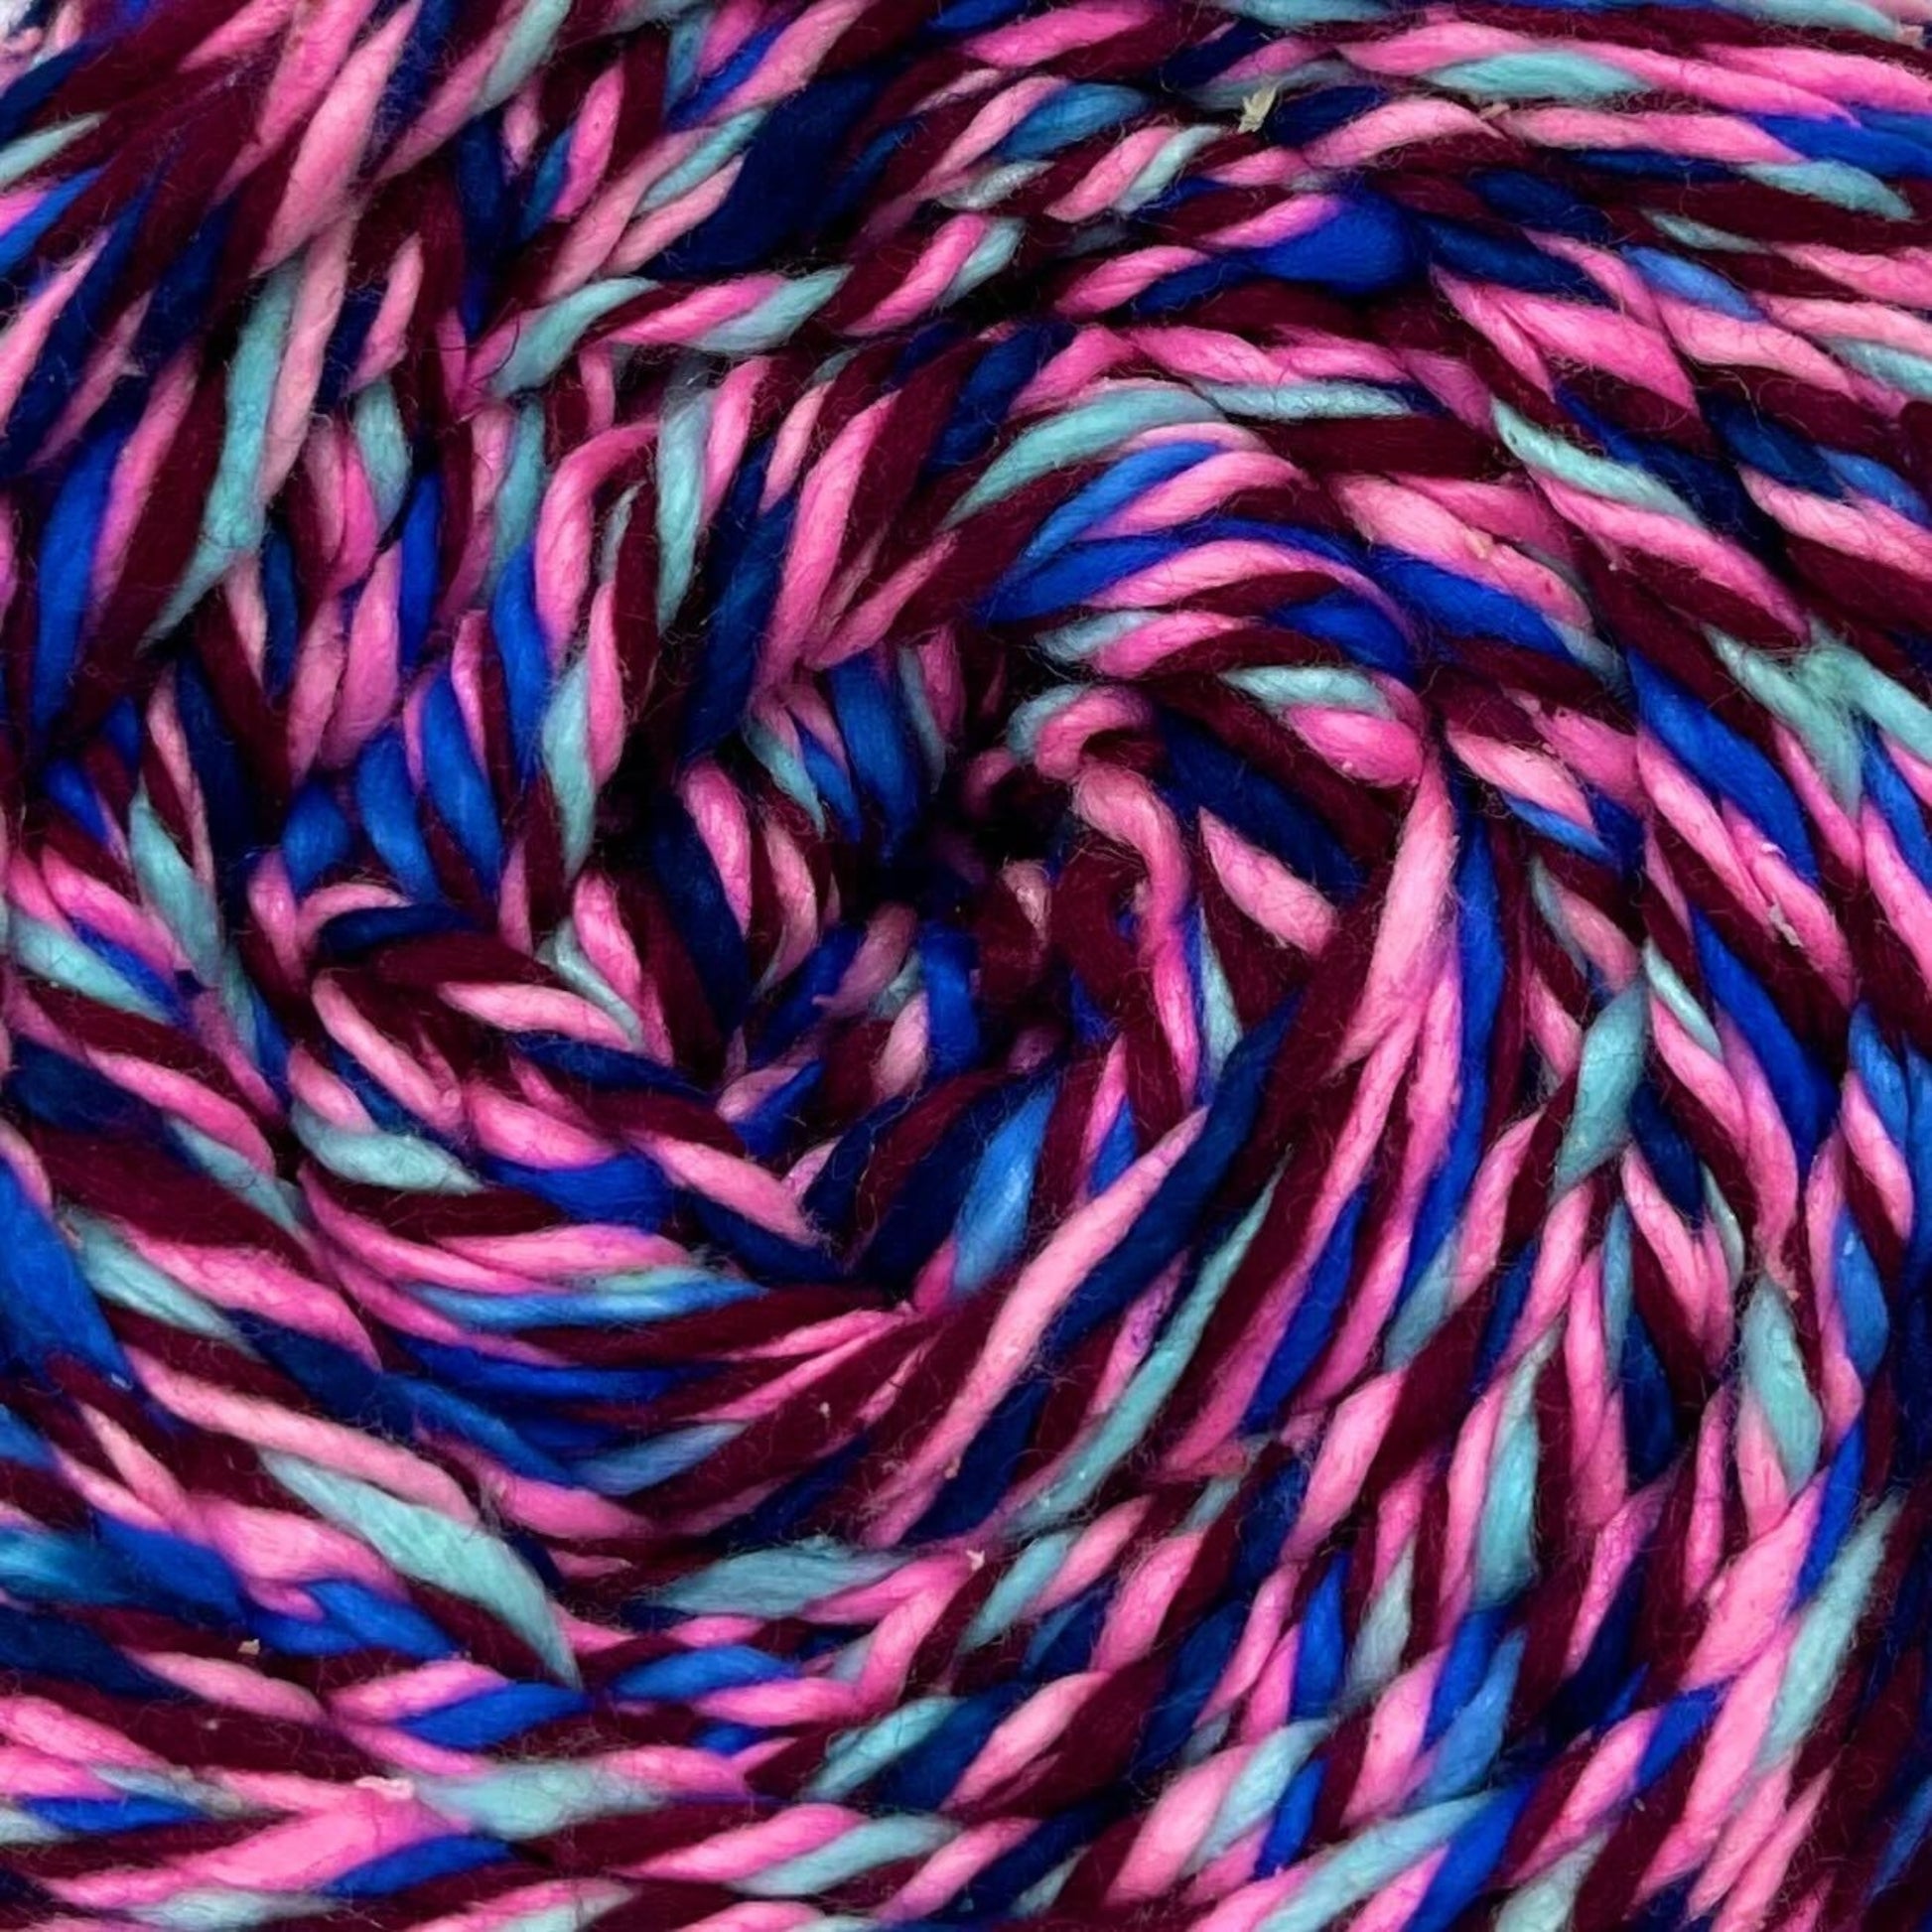 A close up of a skein of reclaimed silk yarn on a white background. The yarn is a triple ply yarn with dark plum, pink, turquoise navy and cobalt blue colors. 